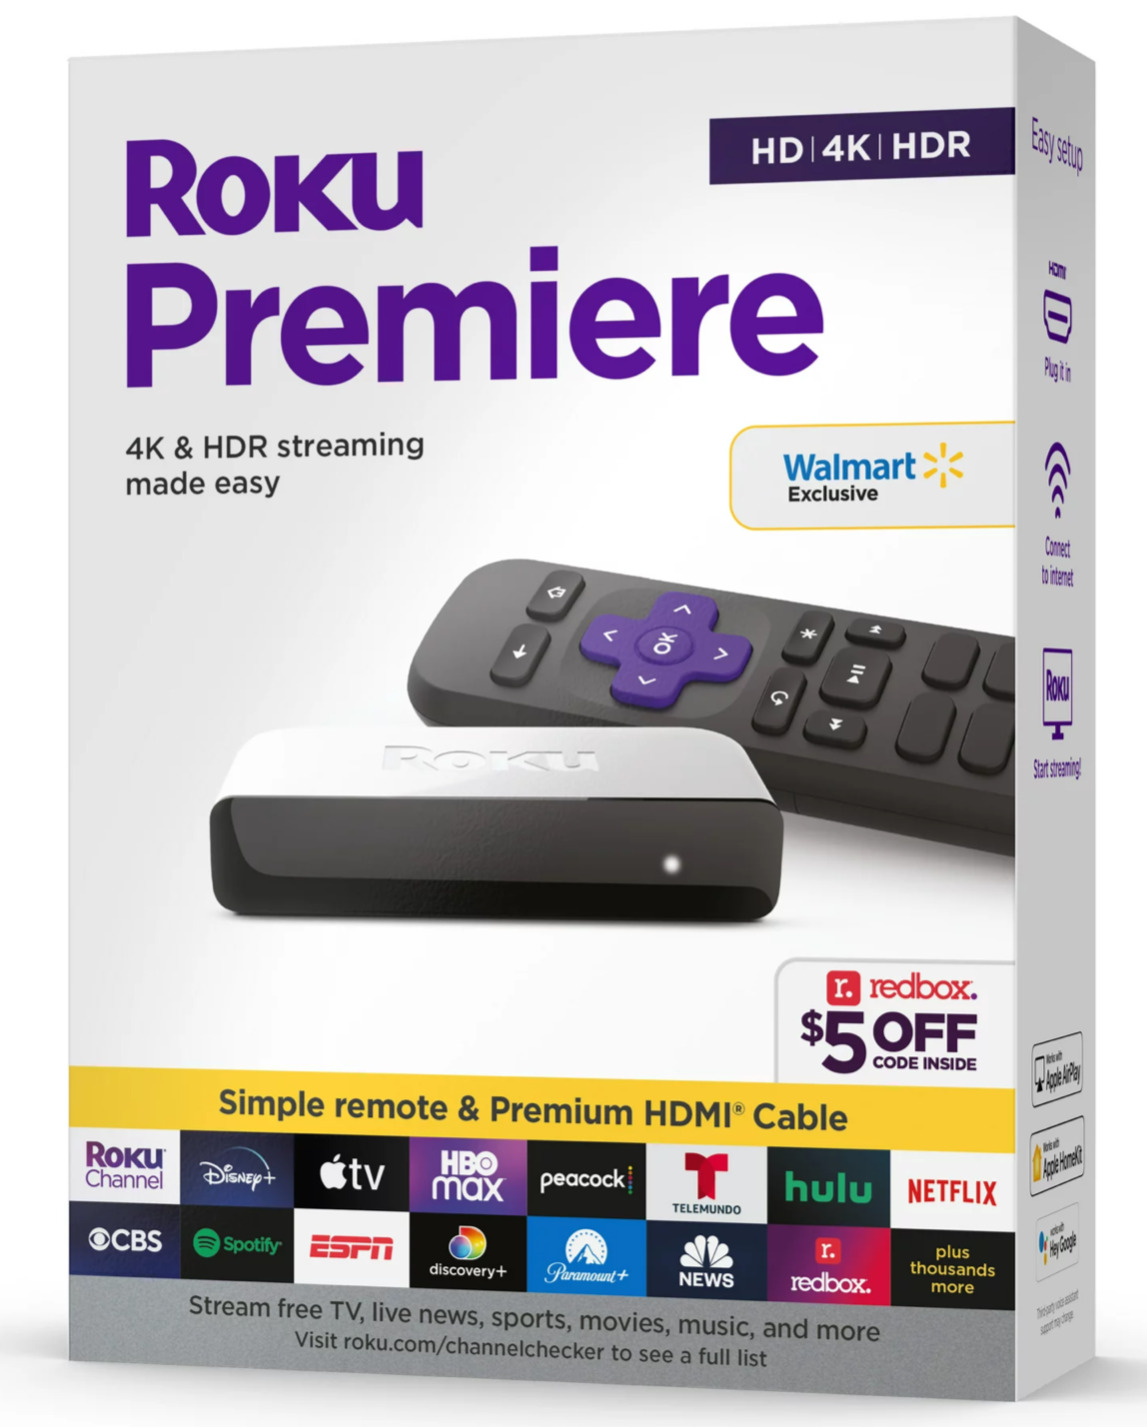 Newest Roku Premiere 3920Rw Hd/4K/Hdr Streaming Media Player,Latest Version!